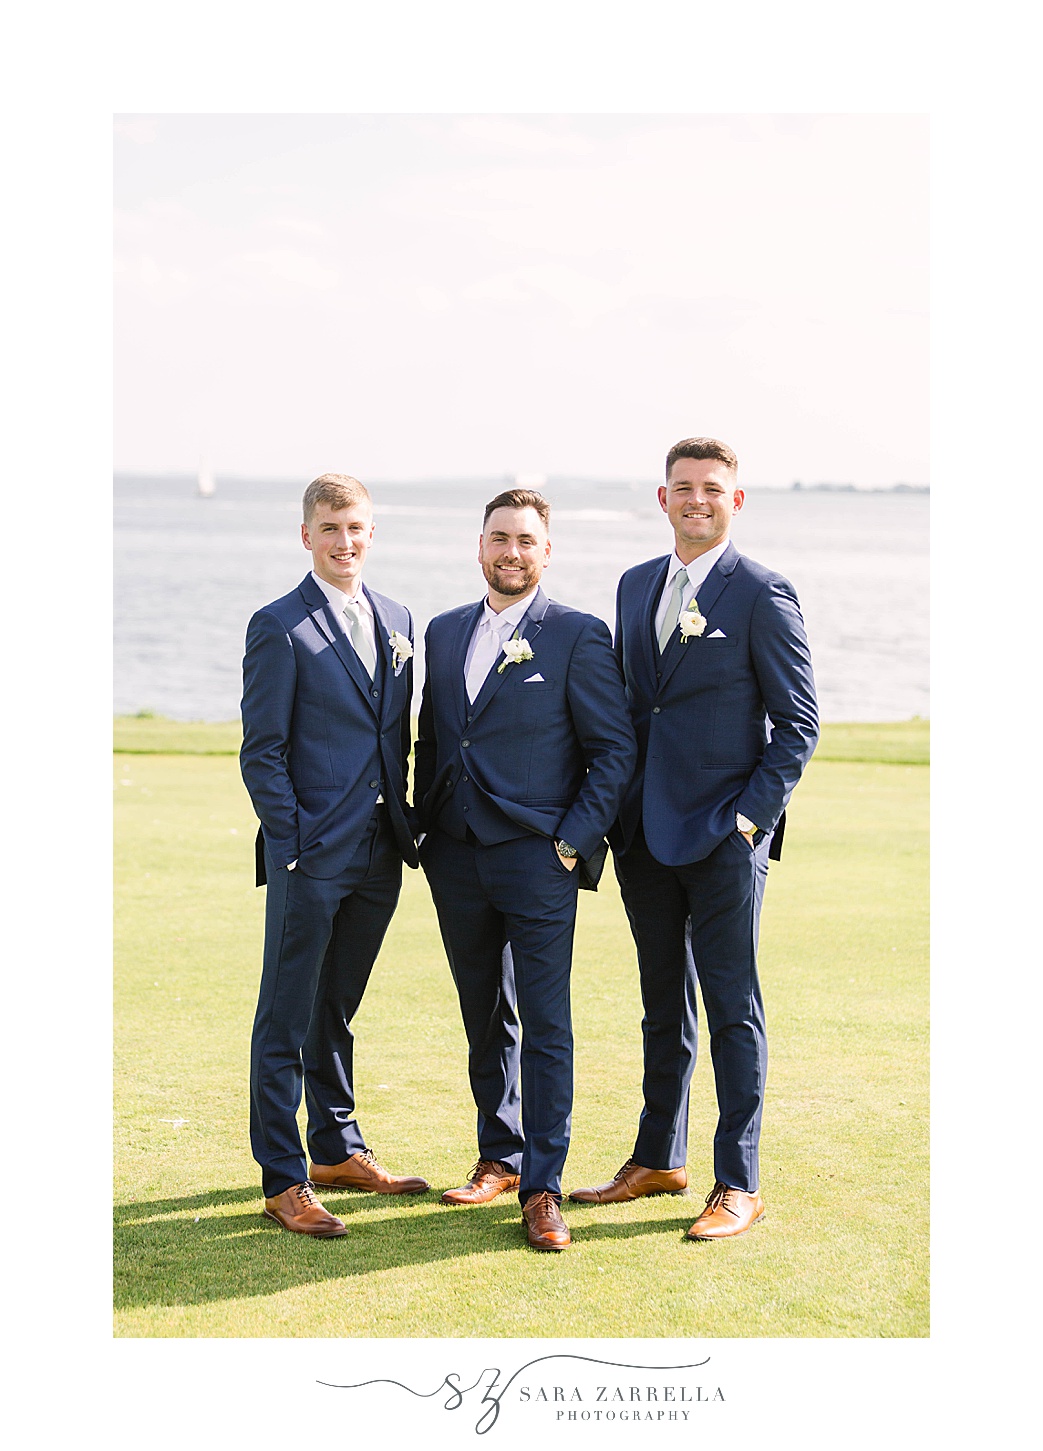 groom poses with two groomsmen in navy suits